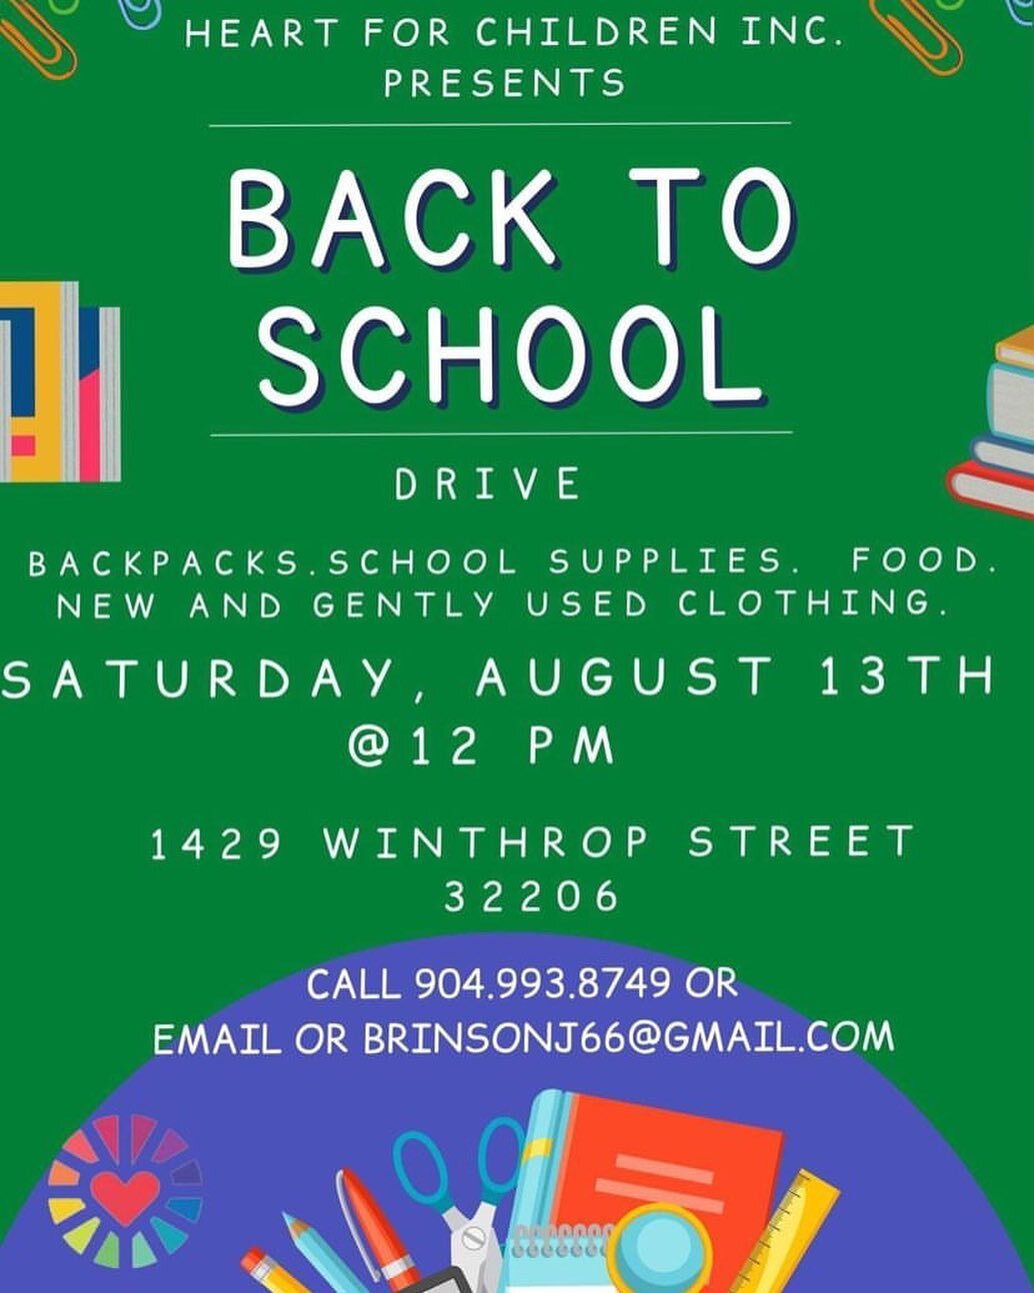 Join us for our Back to School Drive. 📚✂️✏️🖇#backpackgiveaway #duvalschools #jacksonvilleflorida